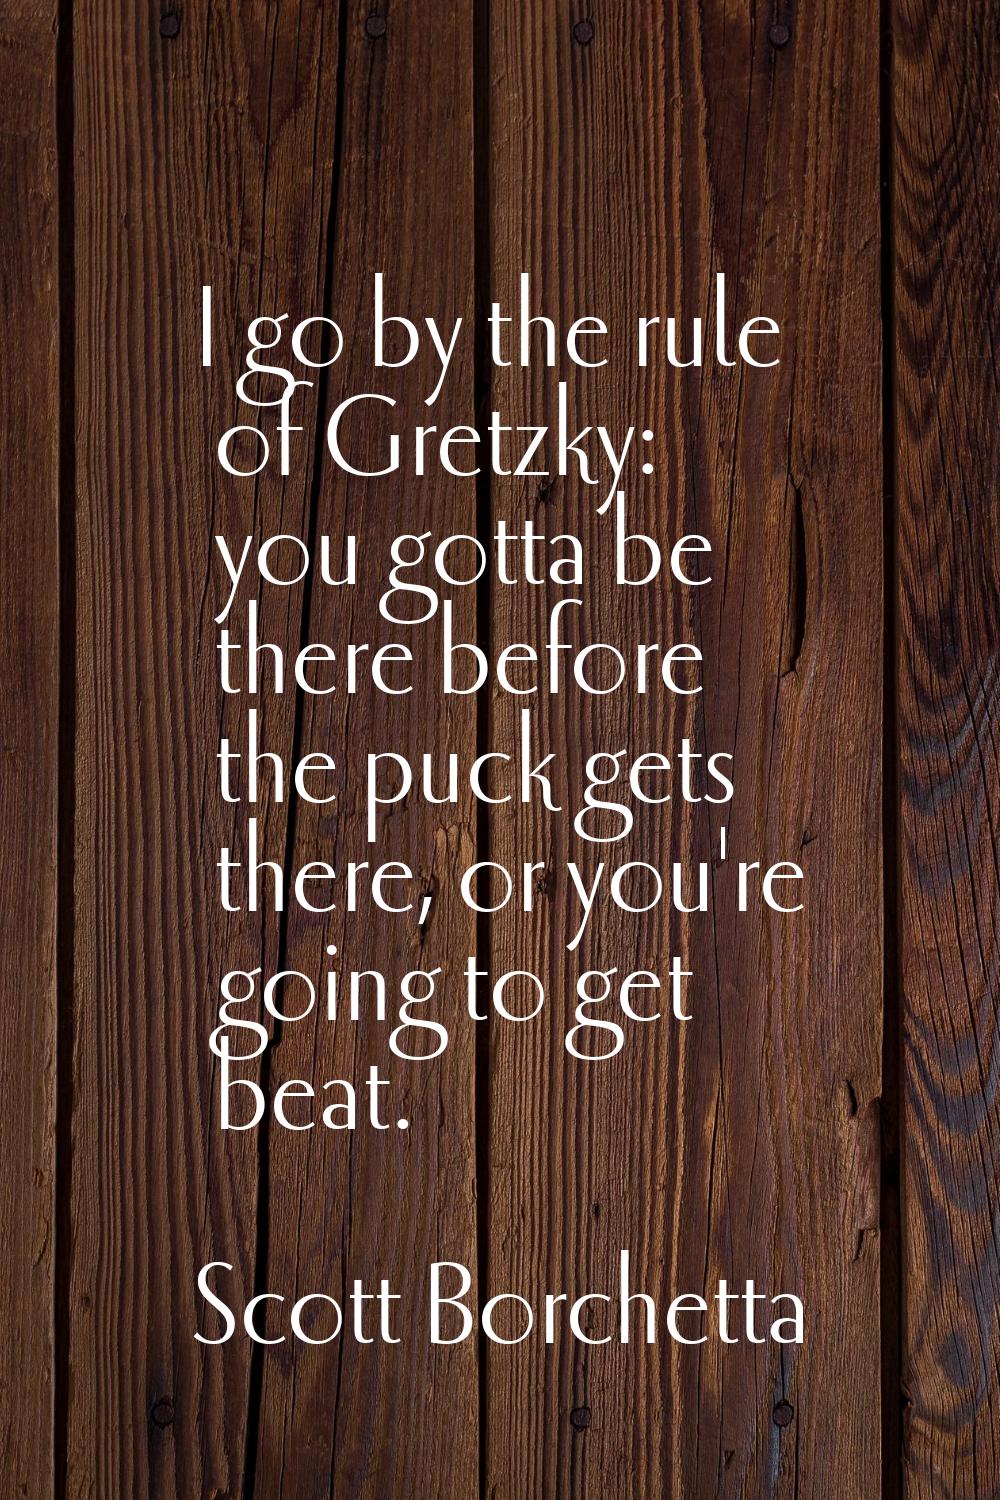 I go by the rule of Gretzky: you gotta be there before the puck gets there, or you're going to get 